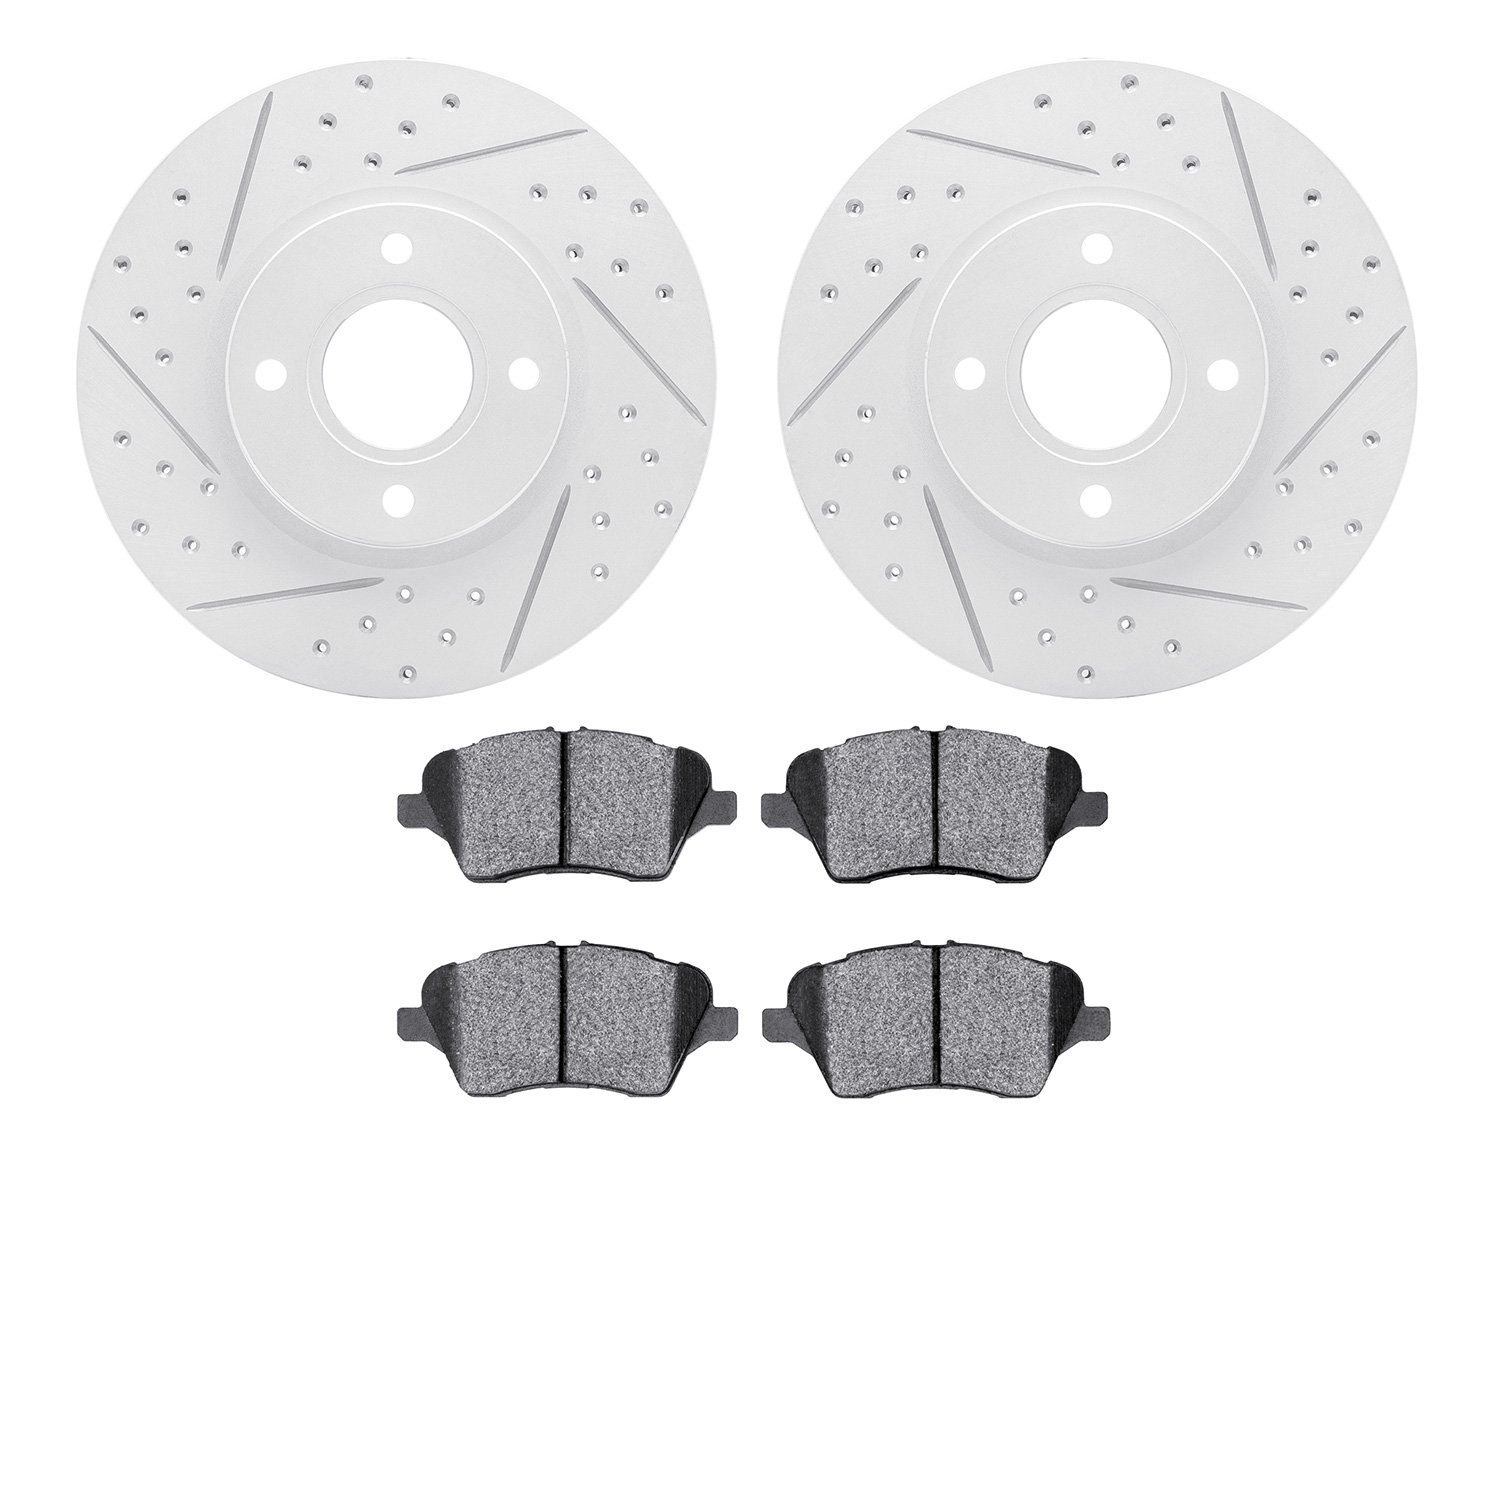 2502-54077 Geoperformance Drilled/Slotted Rotors w/5000 Advanced Brake Pads Kit, 2014-2019 Ford/Lincoln/Mercury/Mazda, Position: